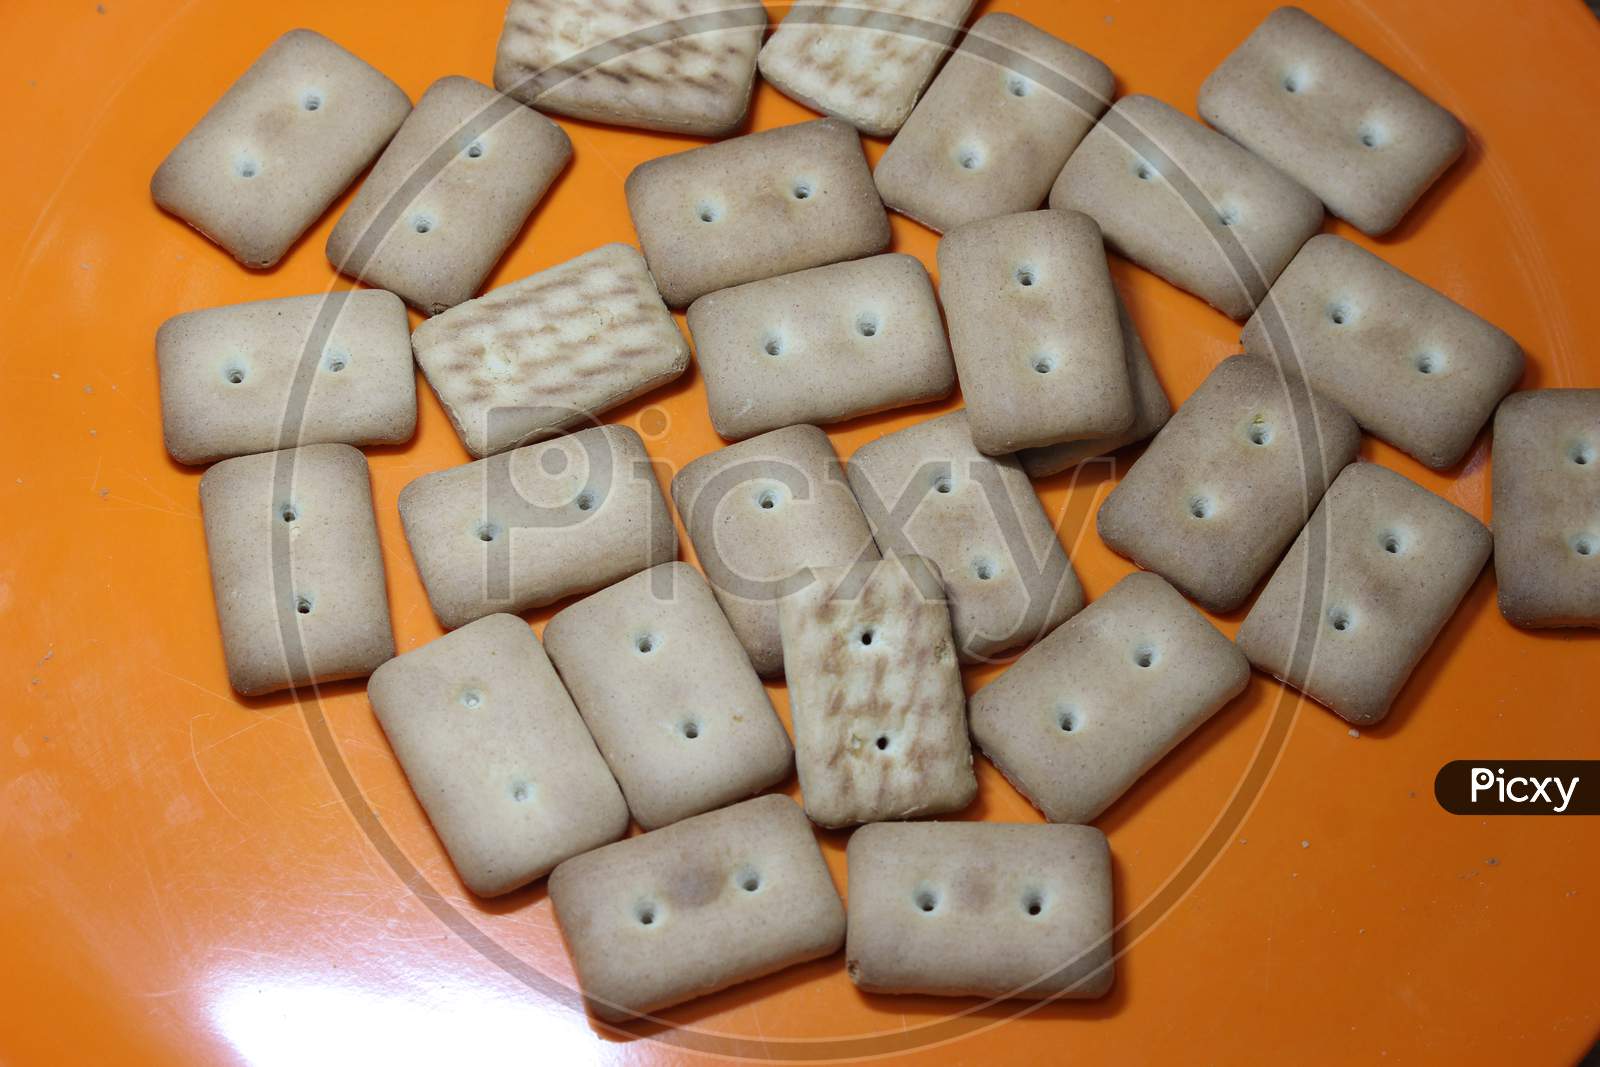 Many Rectangular Biscuits With Small Pores In Red Plate